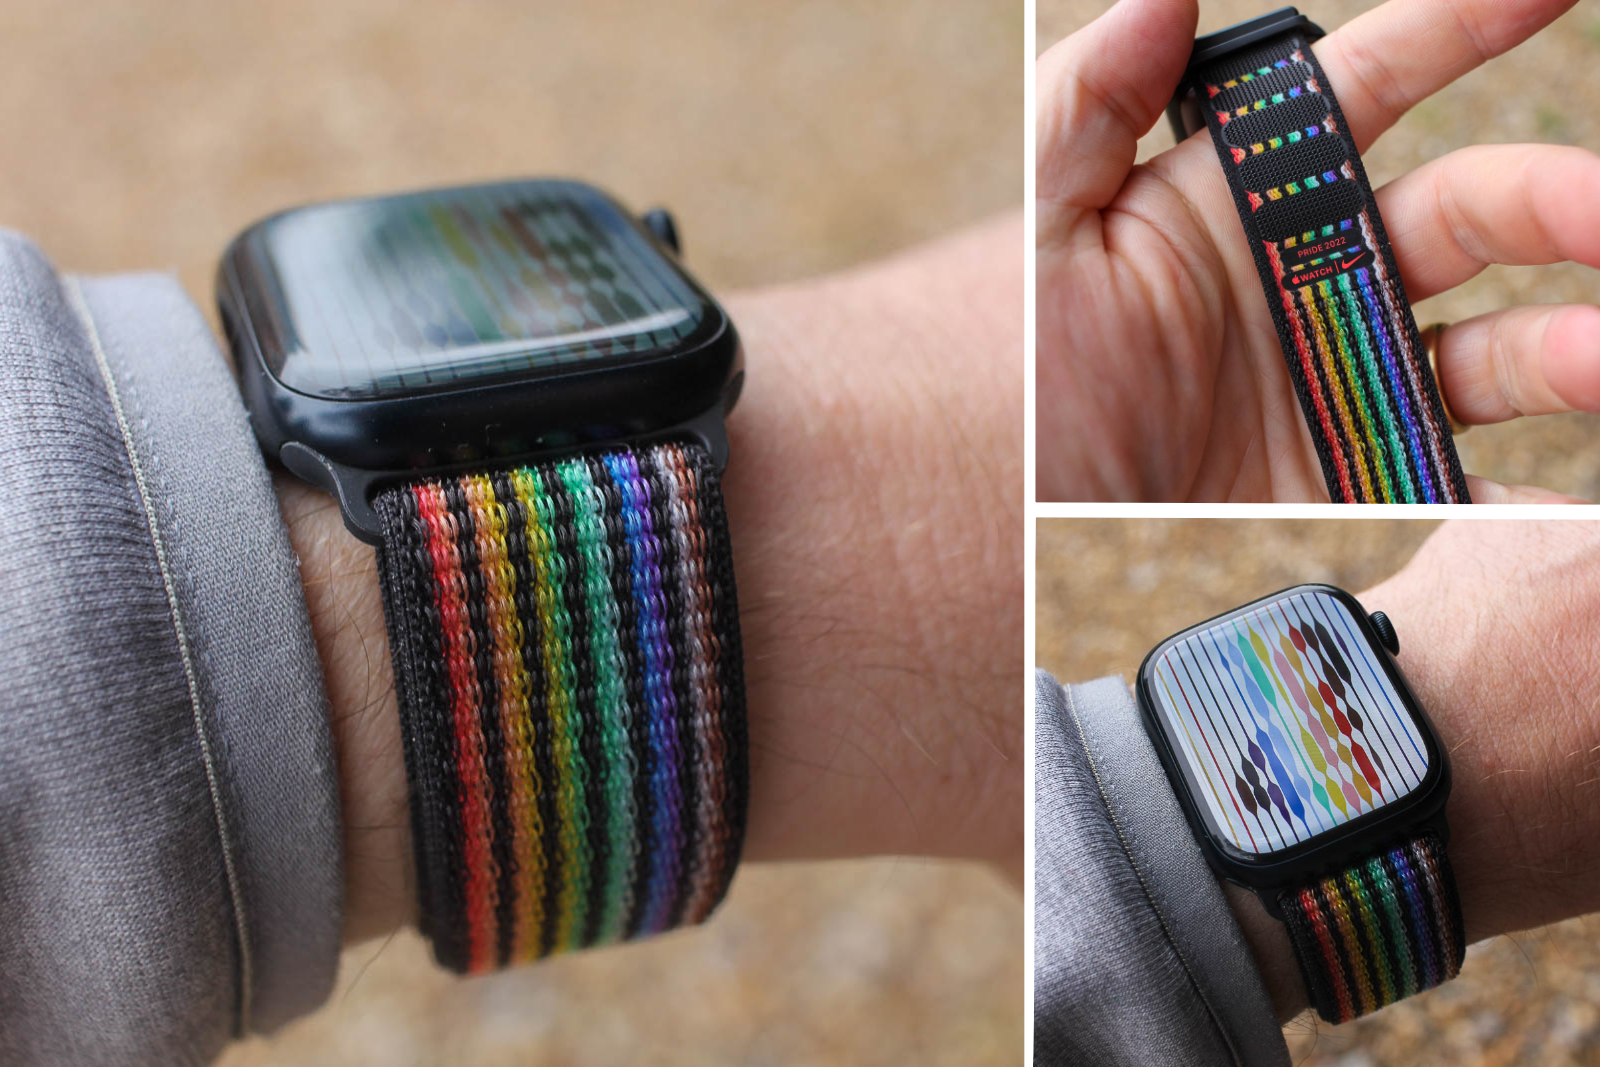 Apple celebrates Pride with rainbow Apple Watch bands and watch face photo 22